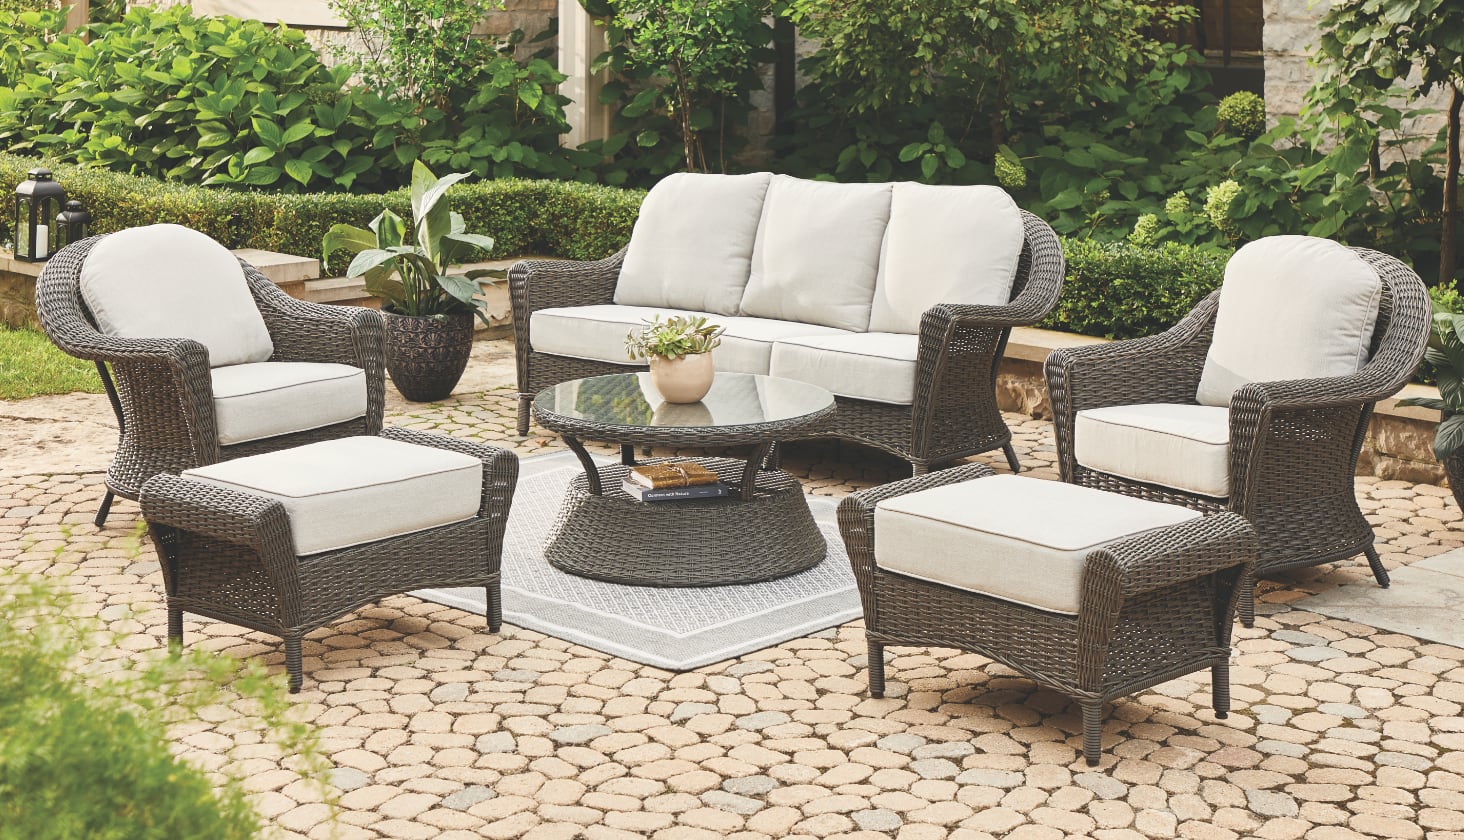 CANVAS Summerhill Conversation and Dining Patio Set, 6-pc Set on an outdoor patio